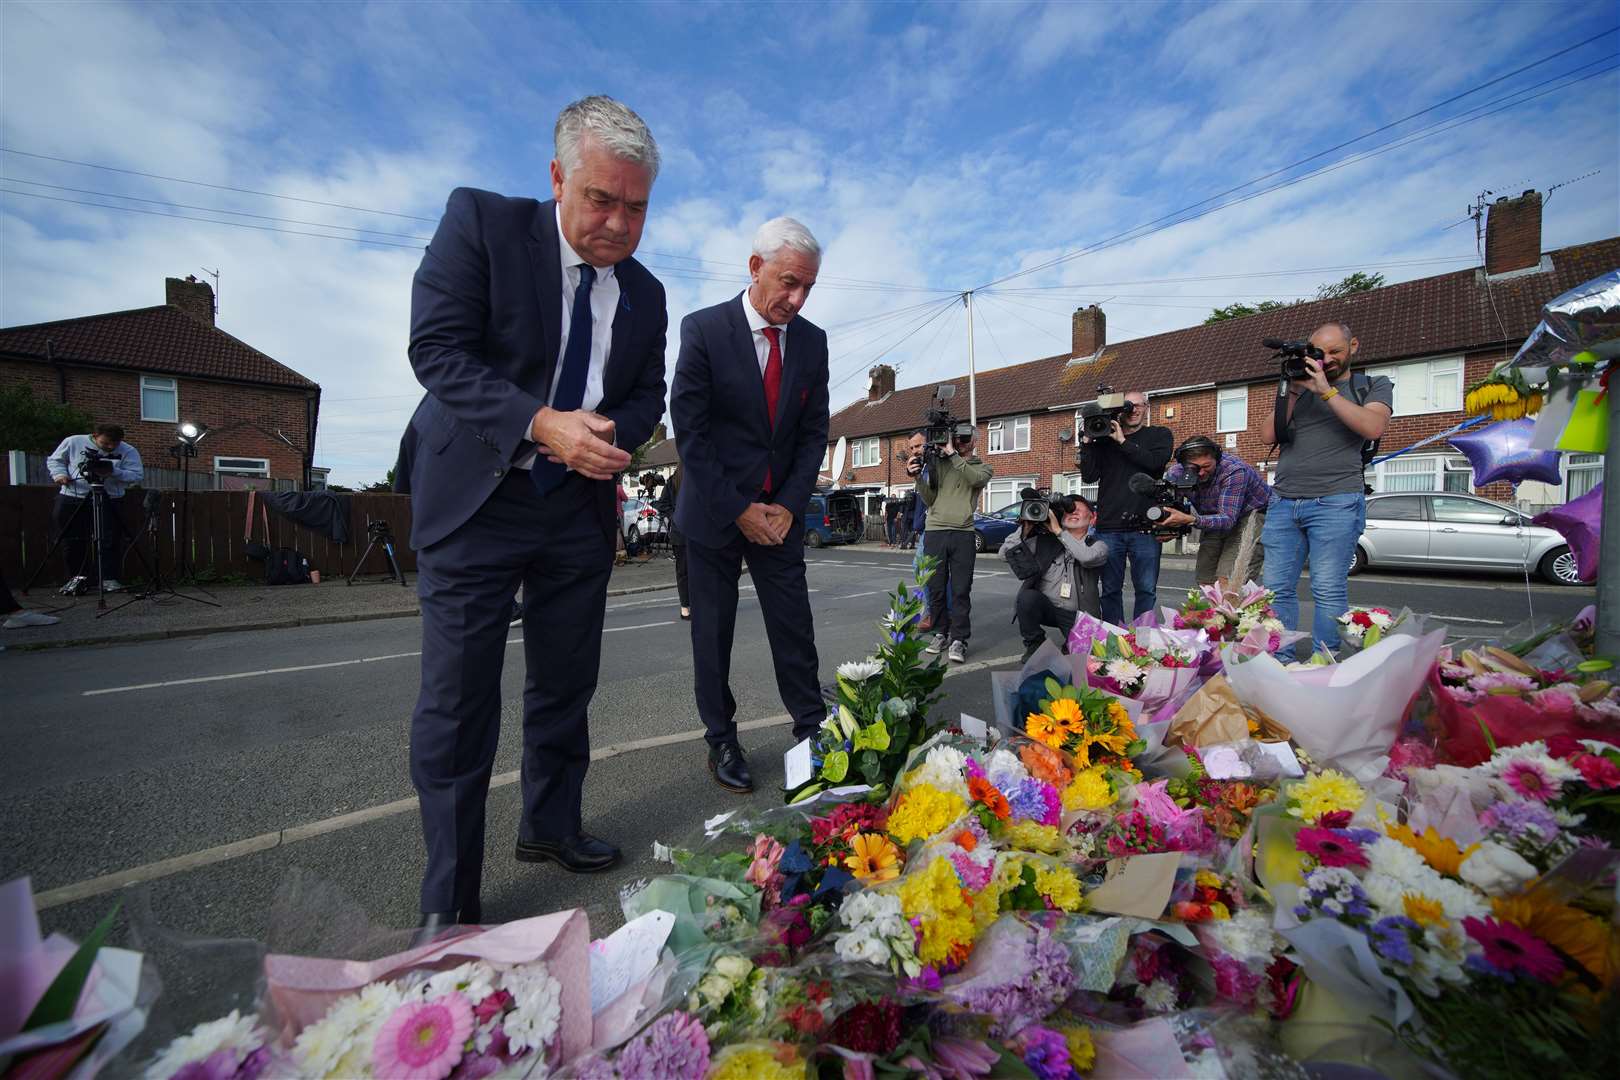 Ambassador of Liverpool FC, Ian Rush (right), and the ambassador of Everton FC, Ian Snodin, visit the scene in Kingsheath Avenue (Peter Byrne/PA)